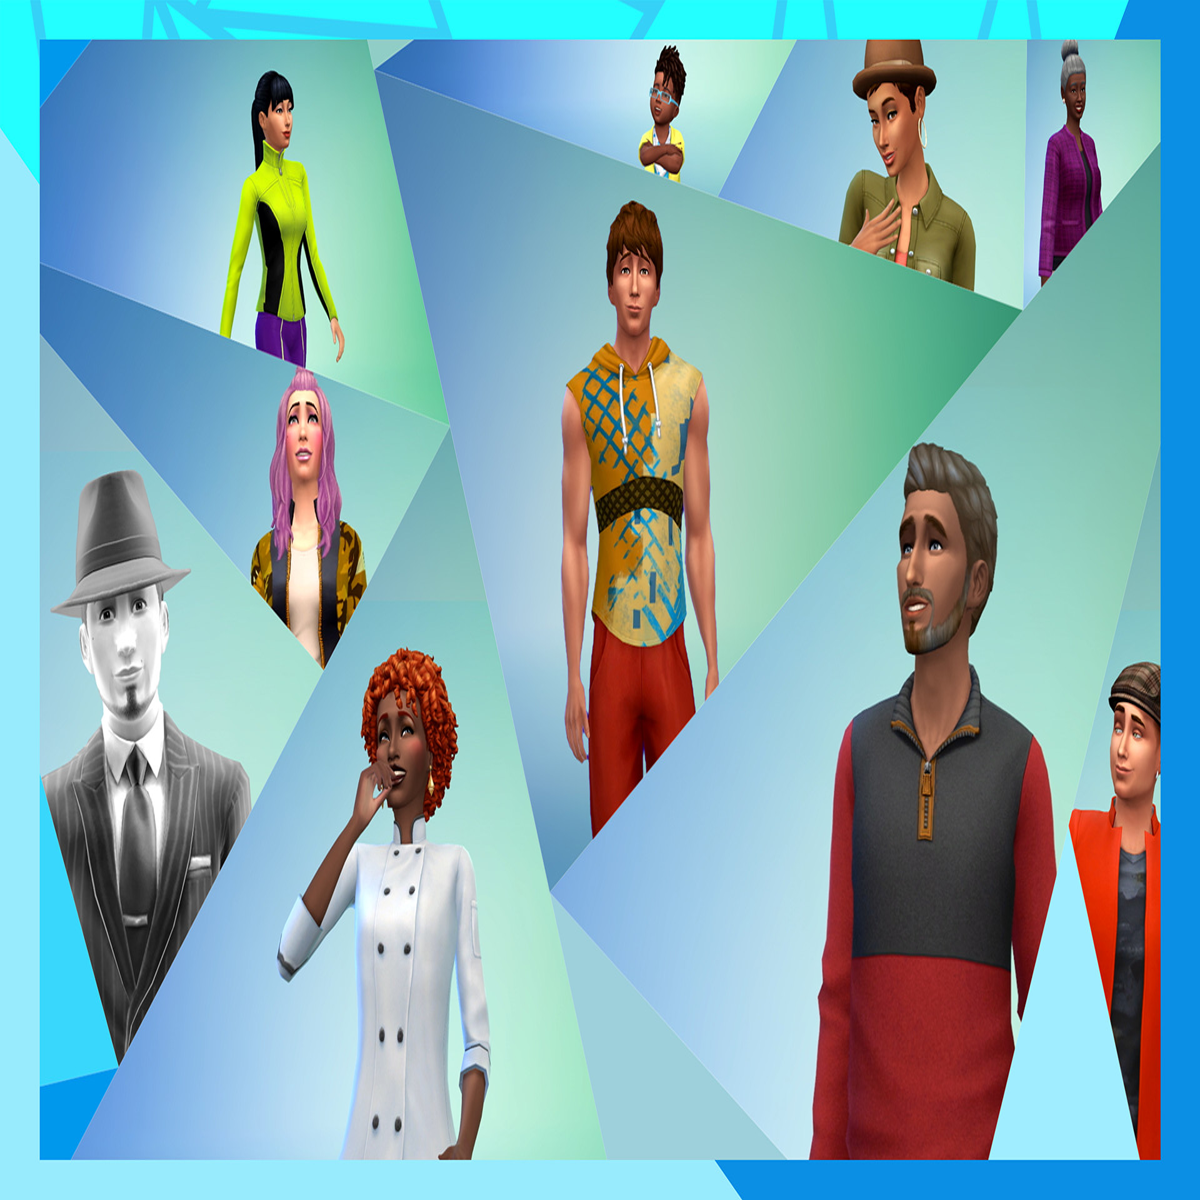 MUST HAVE FREE STUFF PACKS (The Sims 4 mods) 